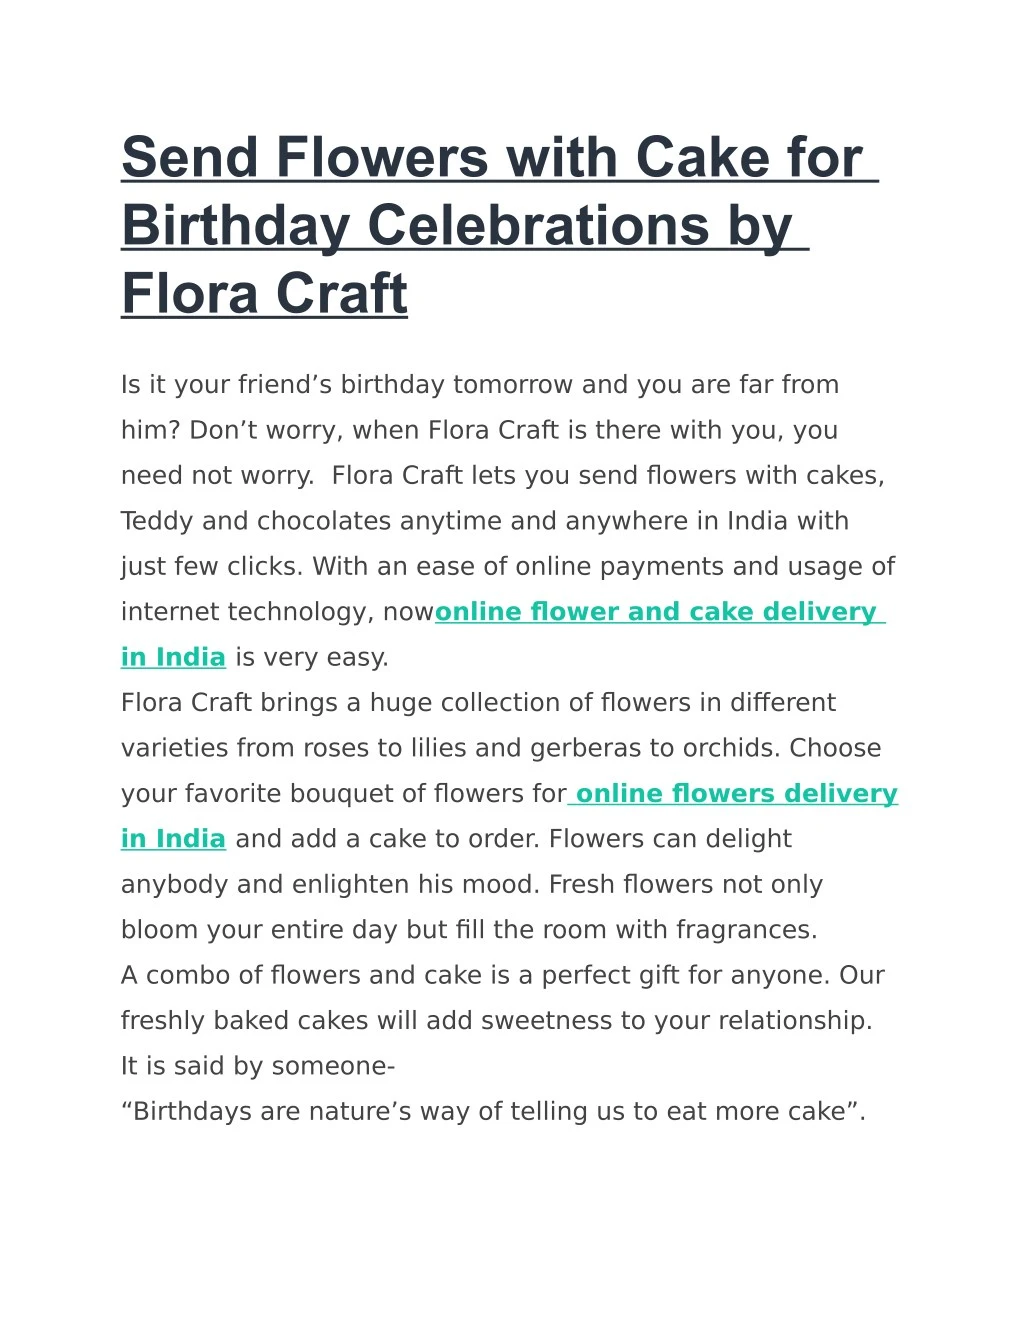 send flowers with cake for birthday celebrations